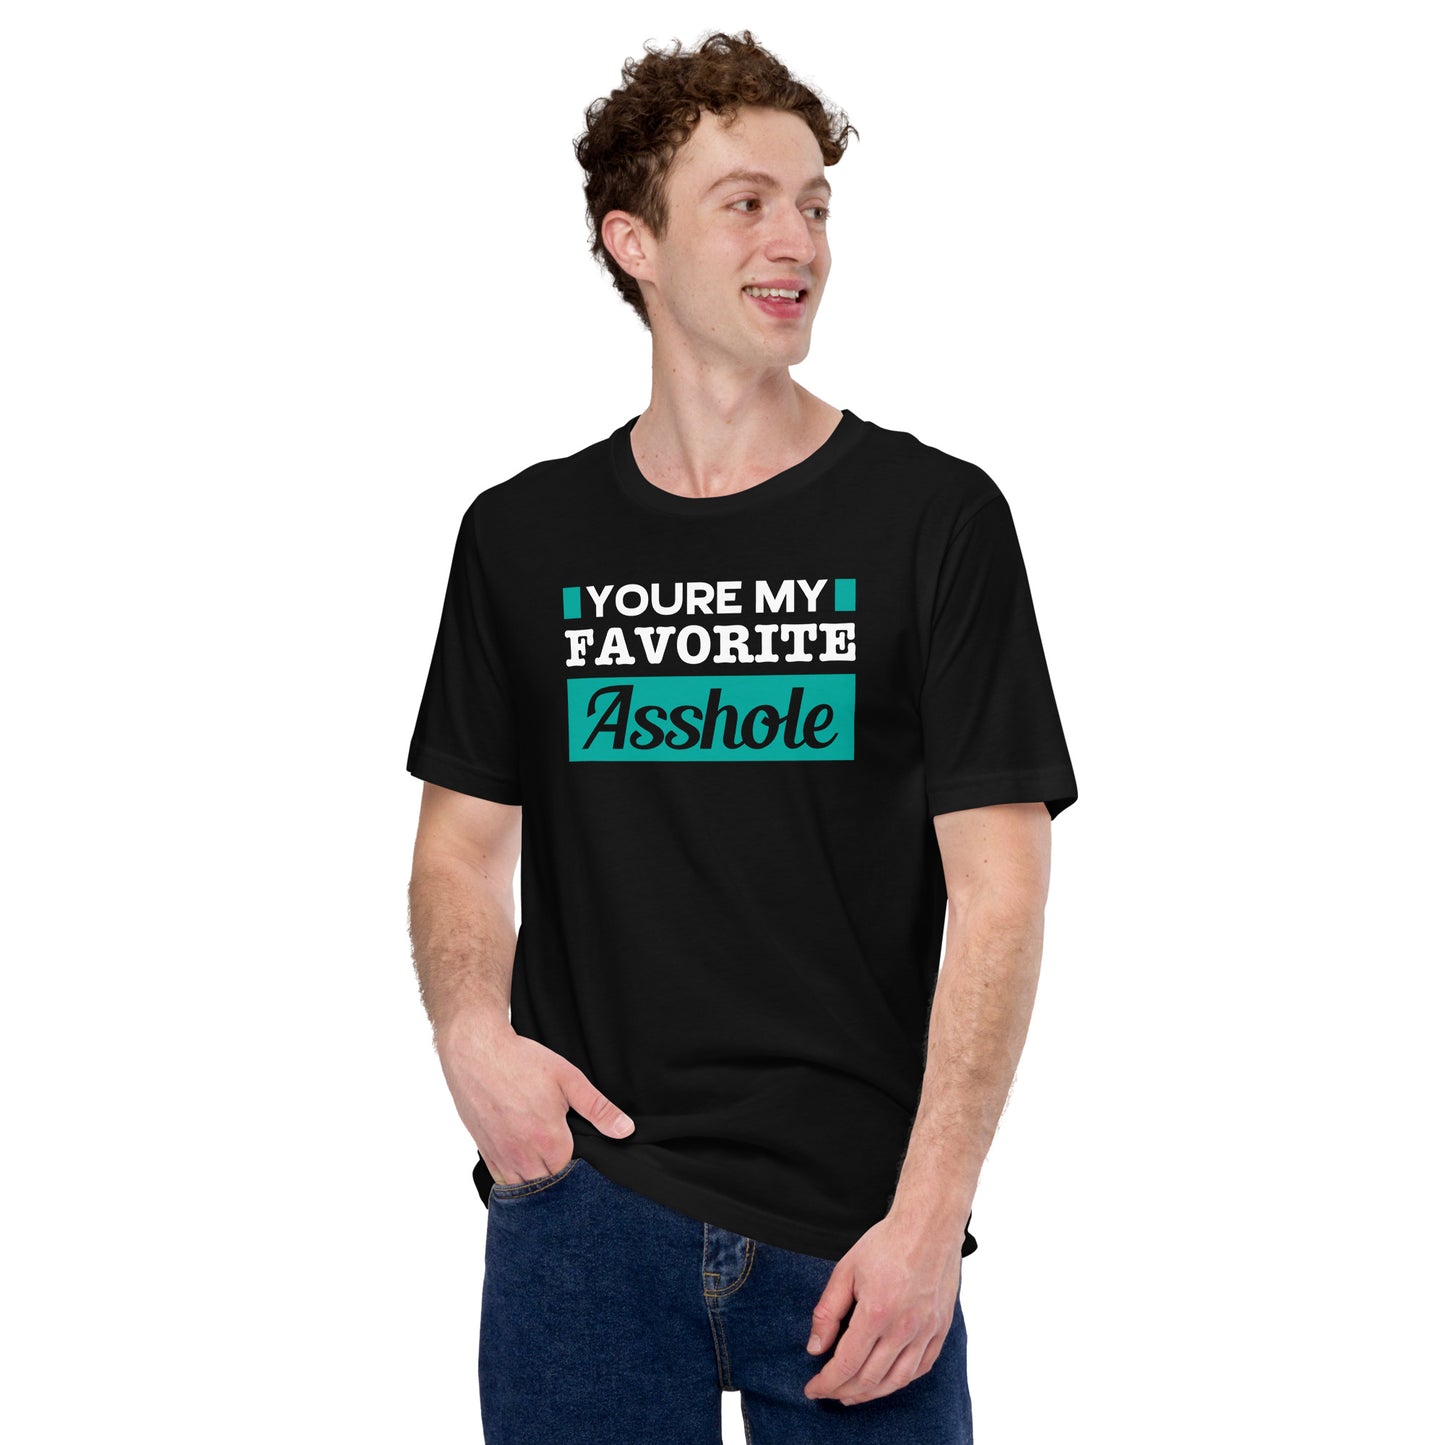 You are my Favorite Asshole Unisex t-shirt